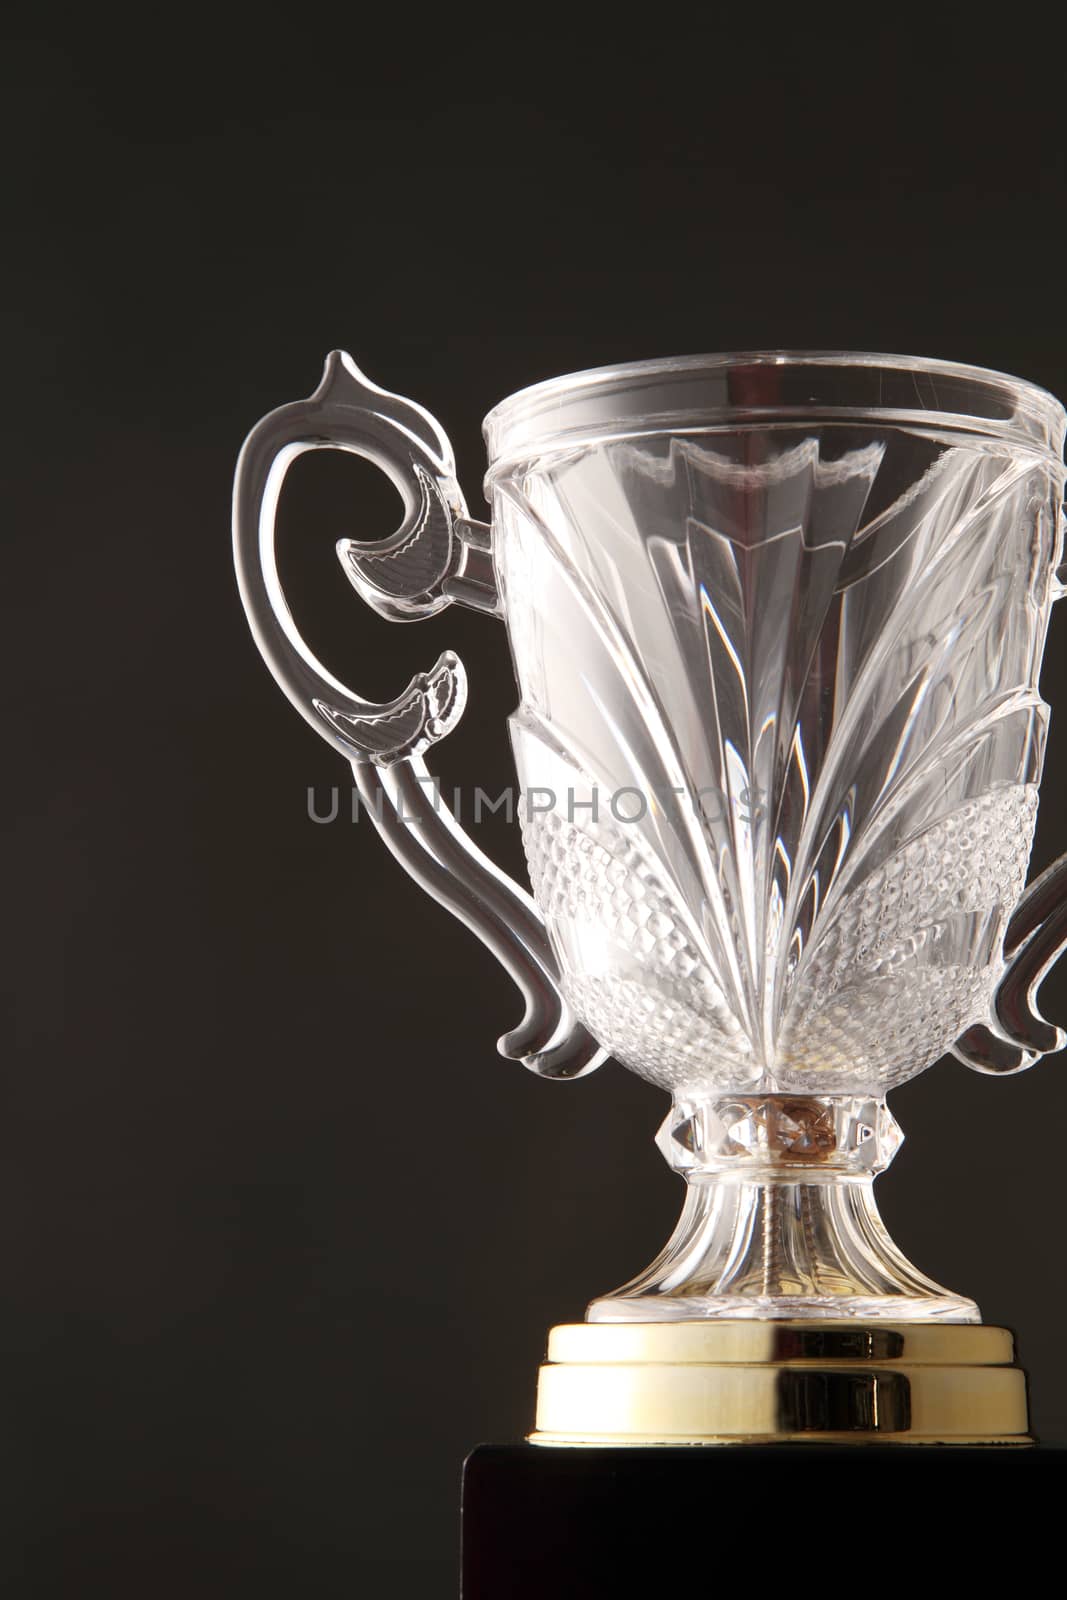 glass trophy on the black background